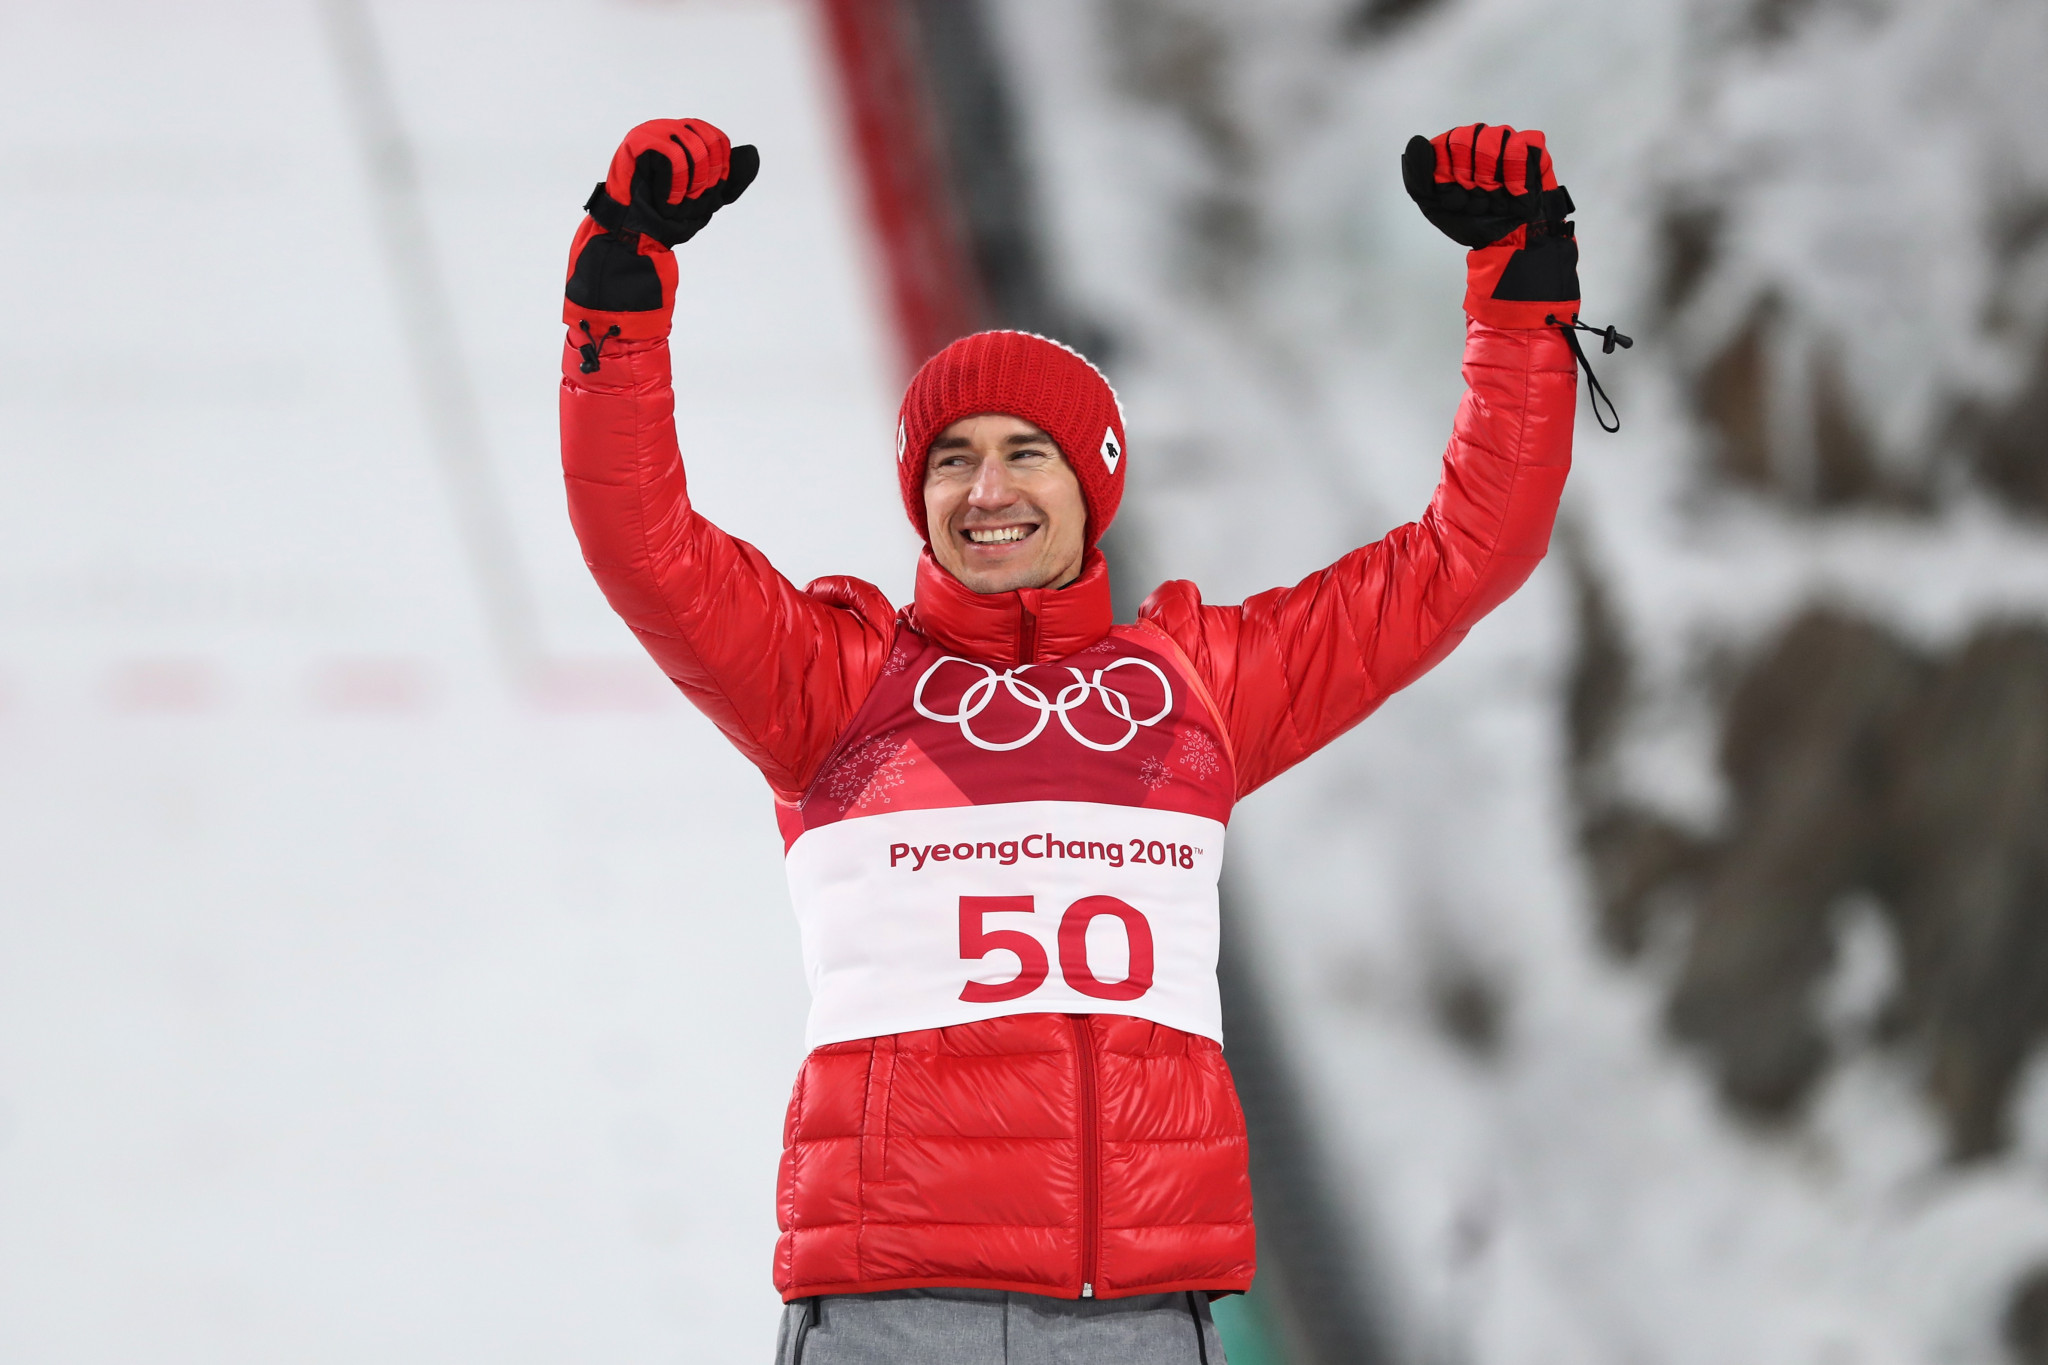 Poland's Stoch successfully defends Olympic ski jumping crown at Pyeongchang 2018